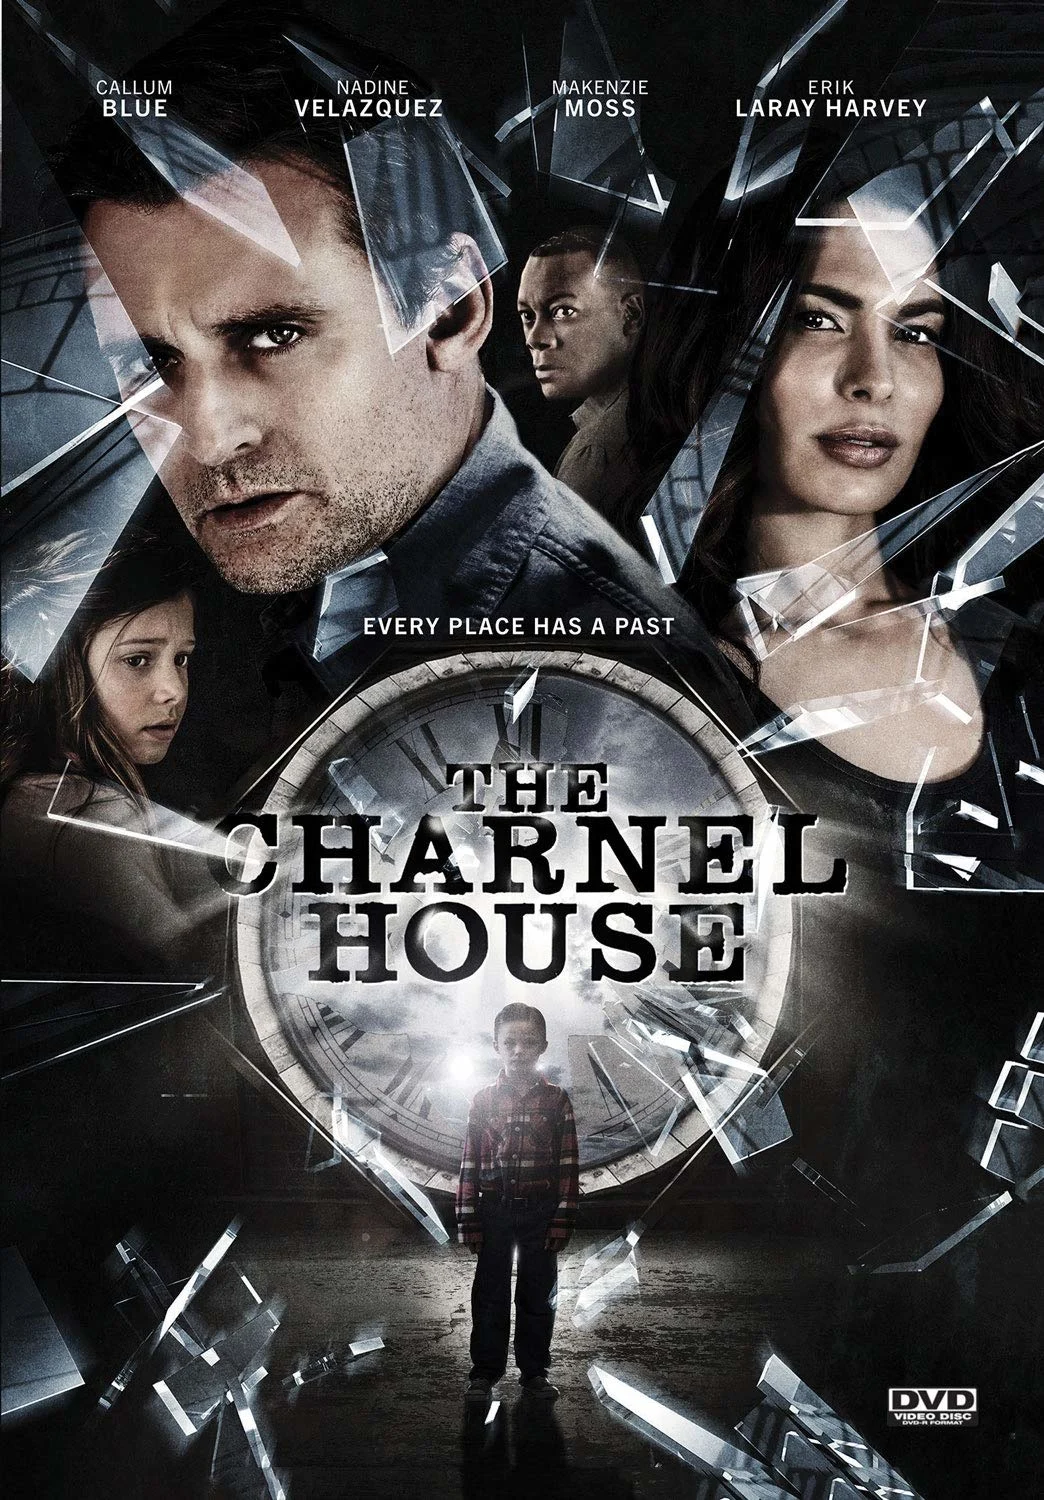 Charnel House, The (DVD) (MOD) on MovieShack